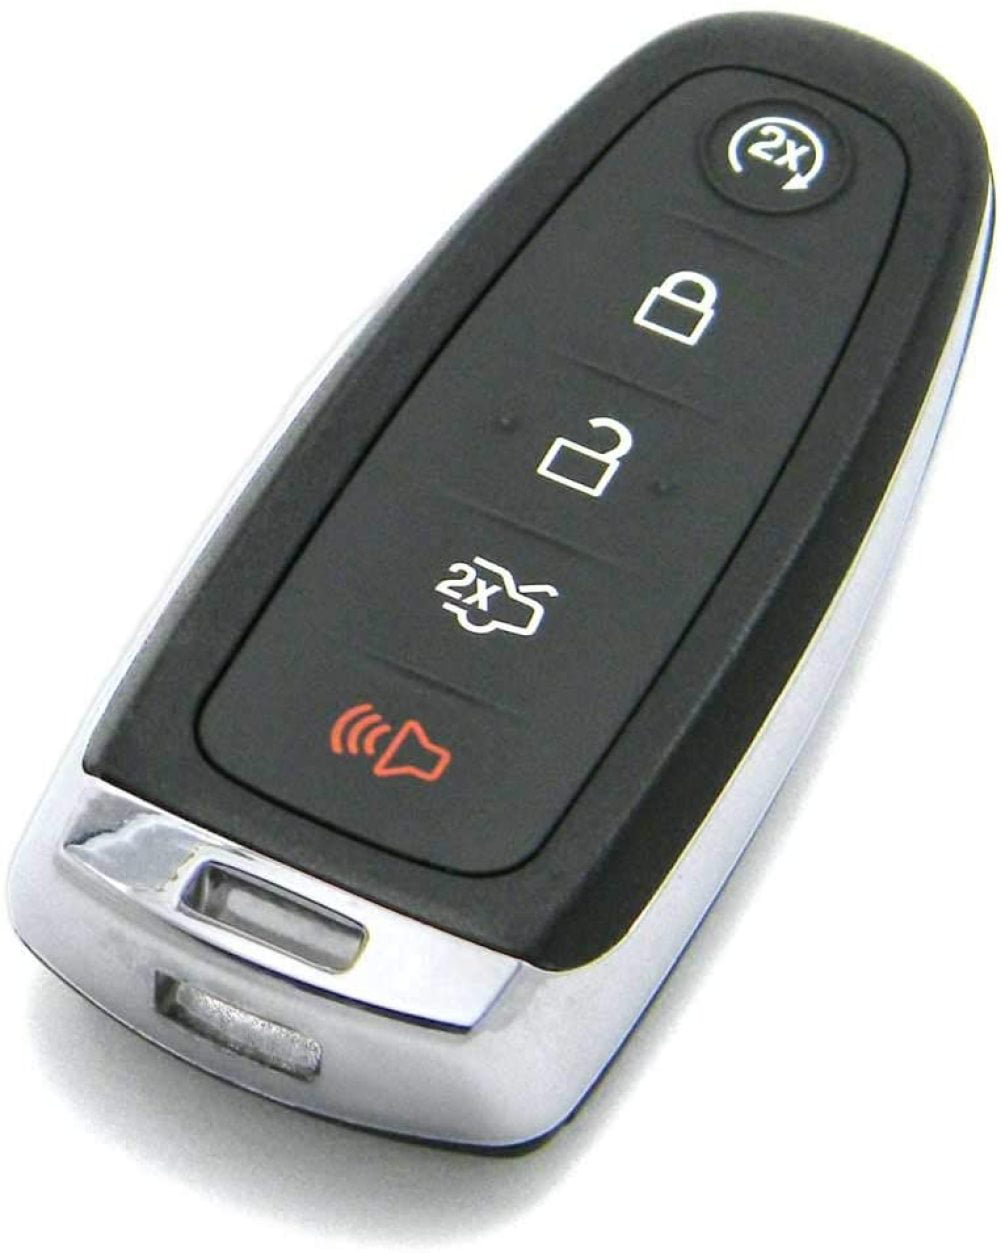 BRAND NEW OEM FACTORY FORD LINCOLN KEYLESS ENTRY REMOTE FOBS KEYS CLICKERS 